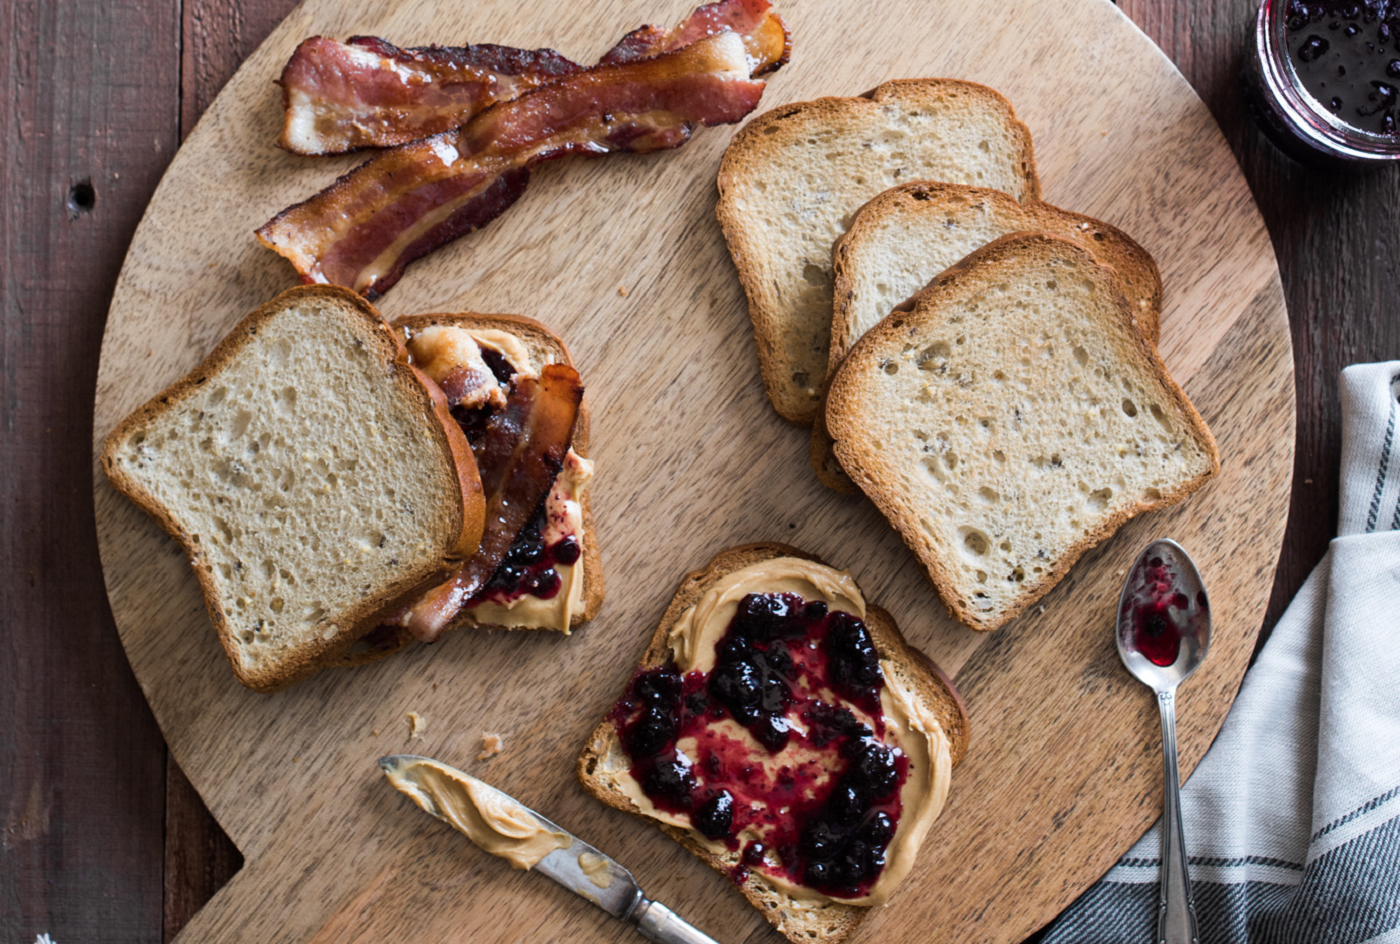 Gluten_free_Multigrain_Loaf_Recipe_Sandwich_Maple_Bacon_Peanut_Butter_and_Jelly_Staged-002-cropped_1400.png